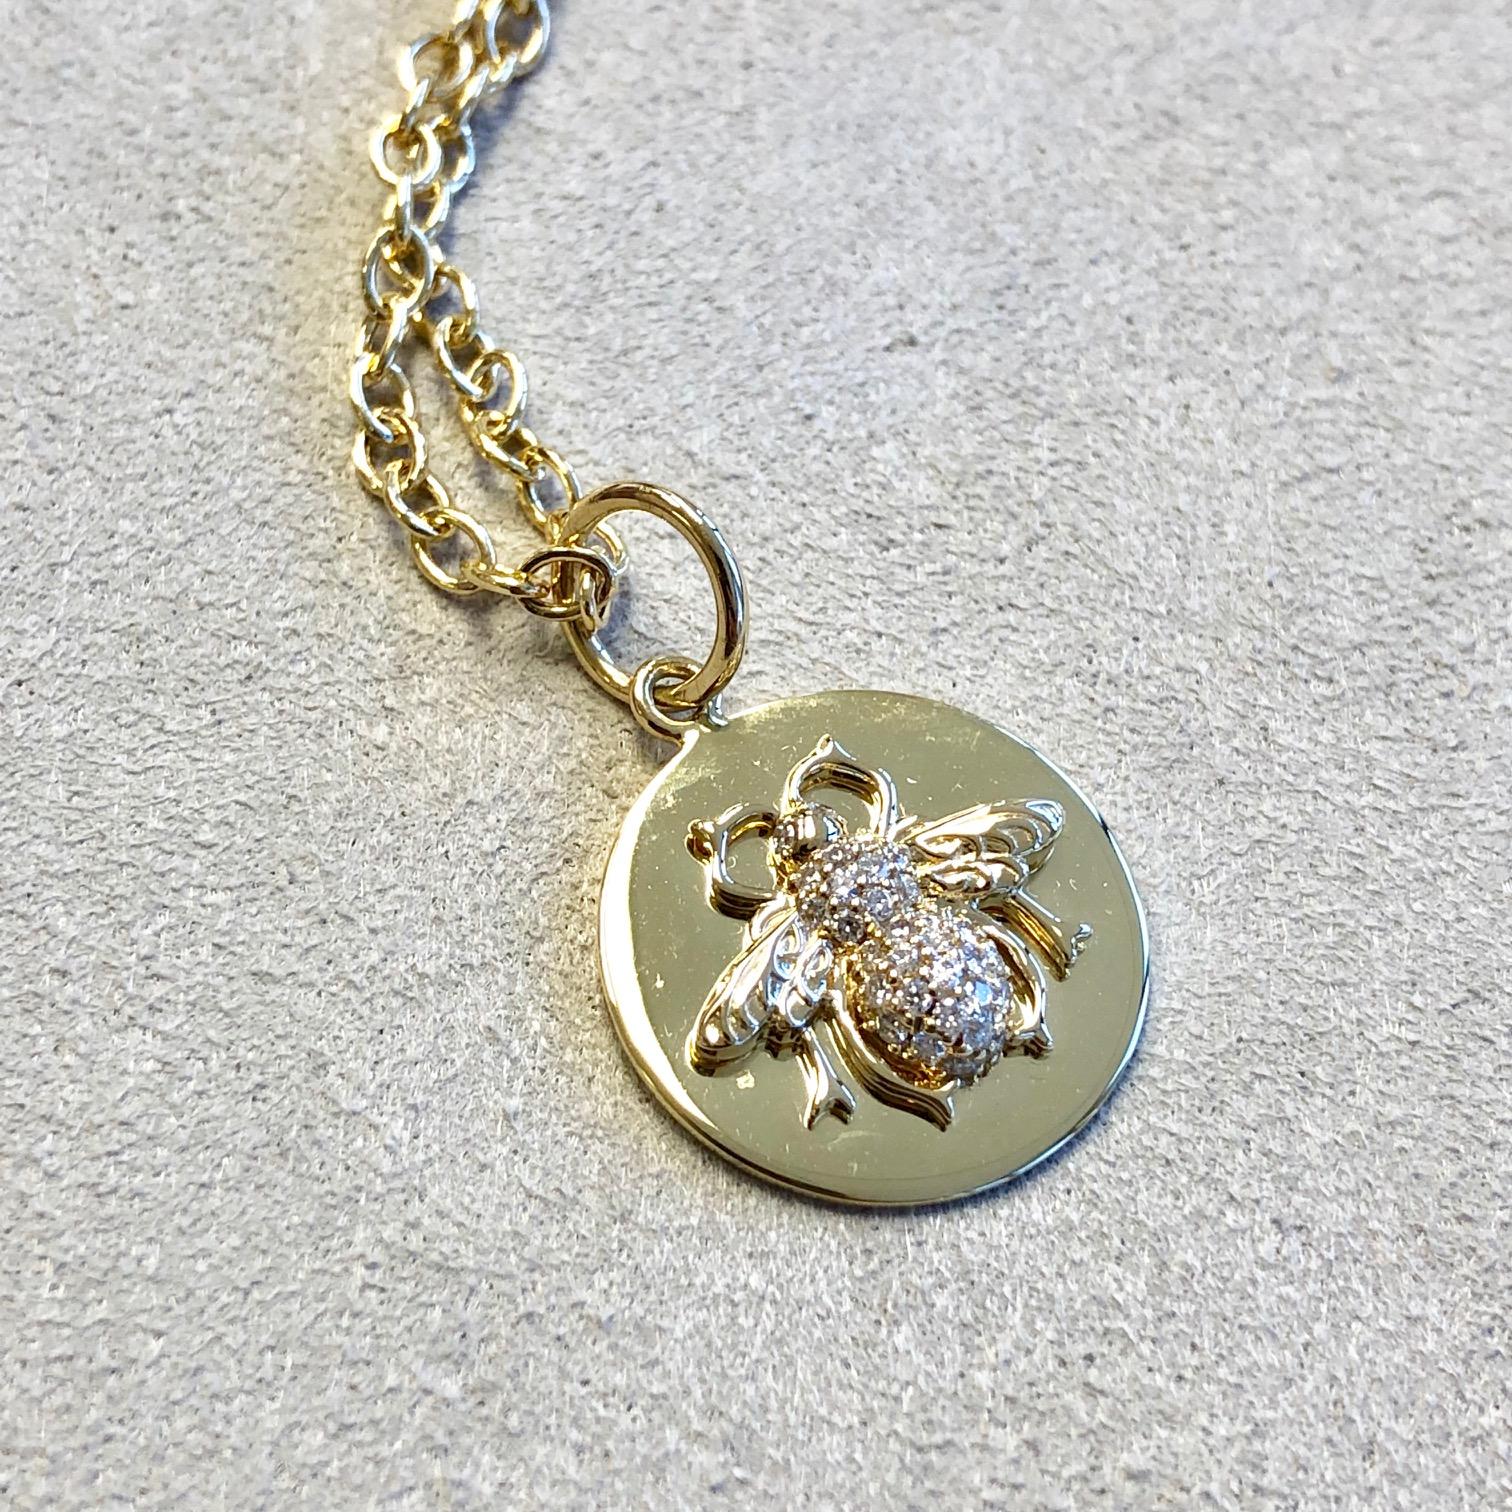 Created in 18 karat yellow gold 
Diamonds 0.15 ct approx
Chain sold separately
Limited edition

Crafted from 18 karat yellow gold, this one-of-a-kind pendant features a hand-painted and hand-carved bone hummingbird, studded with approximately 2